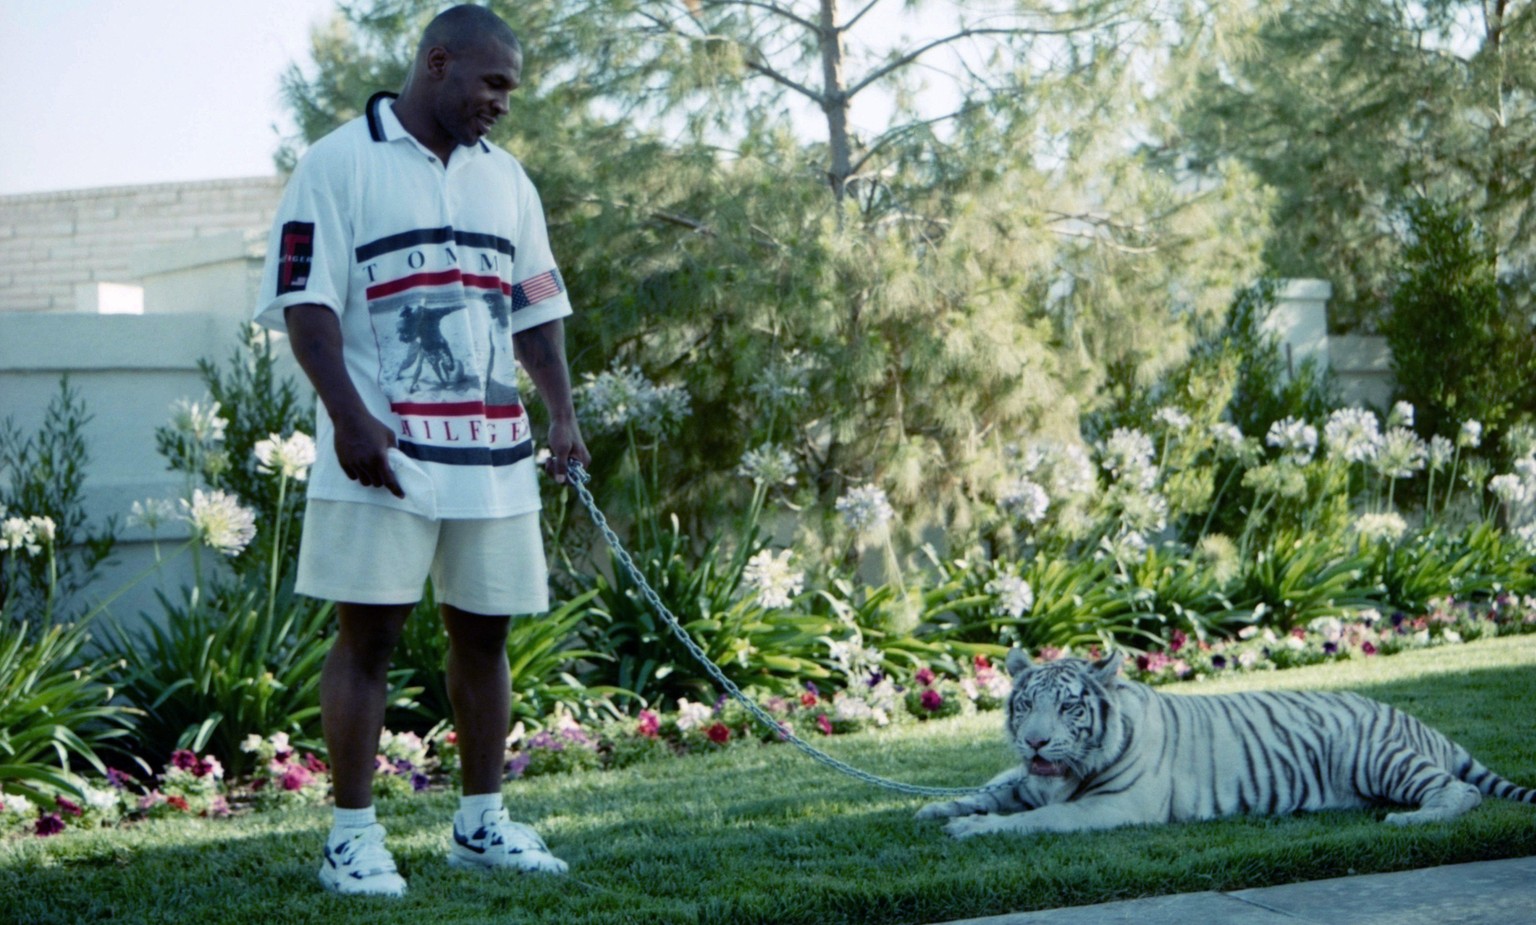 LAS VEGAS - CIRCA 1989: Mike Tyson poses with his white tiger during an interview at his home.
(Photo by: The Ring Magazine via Getty Images)